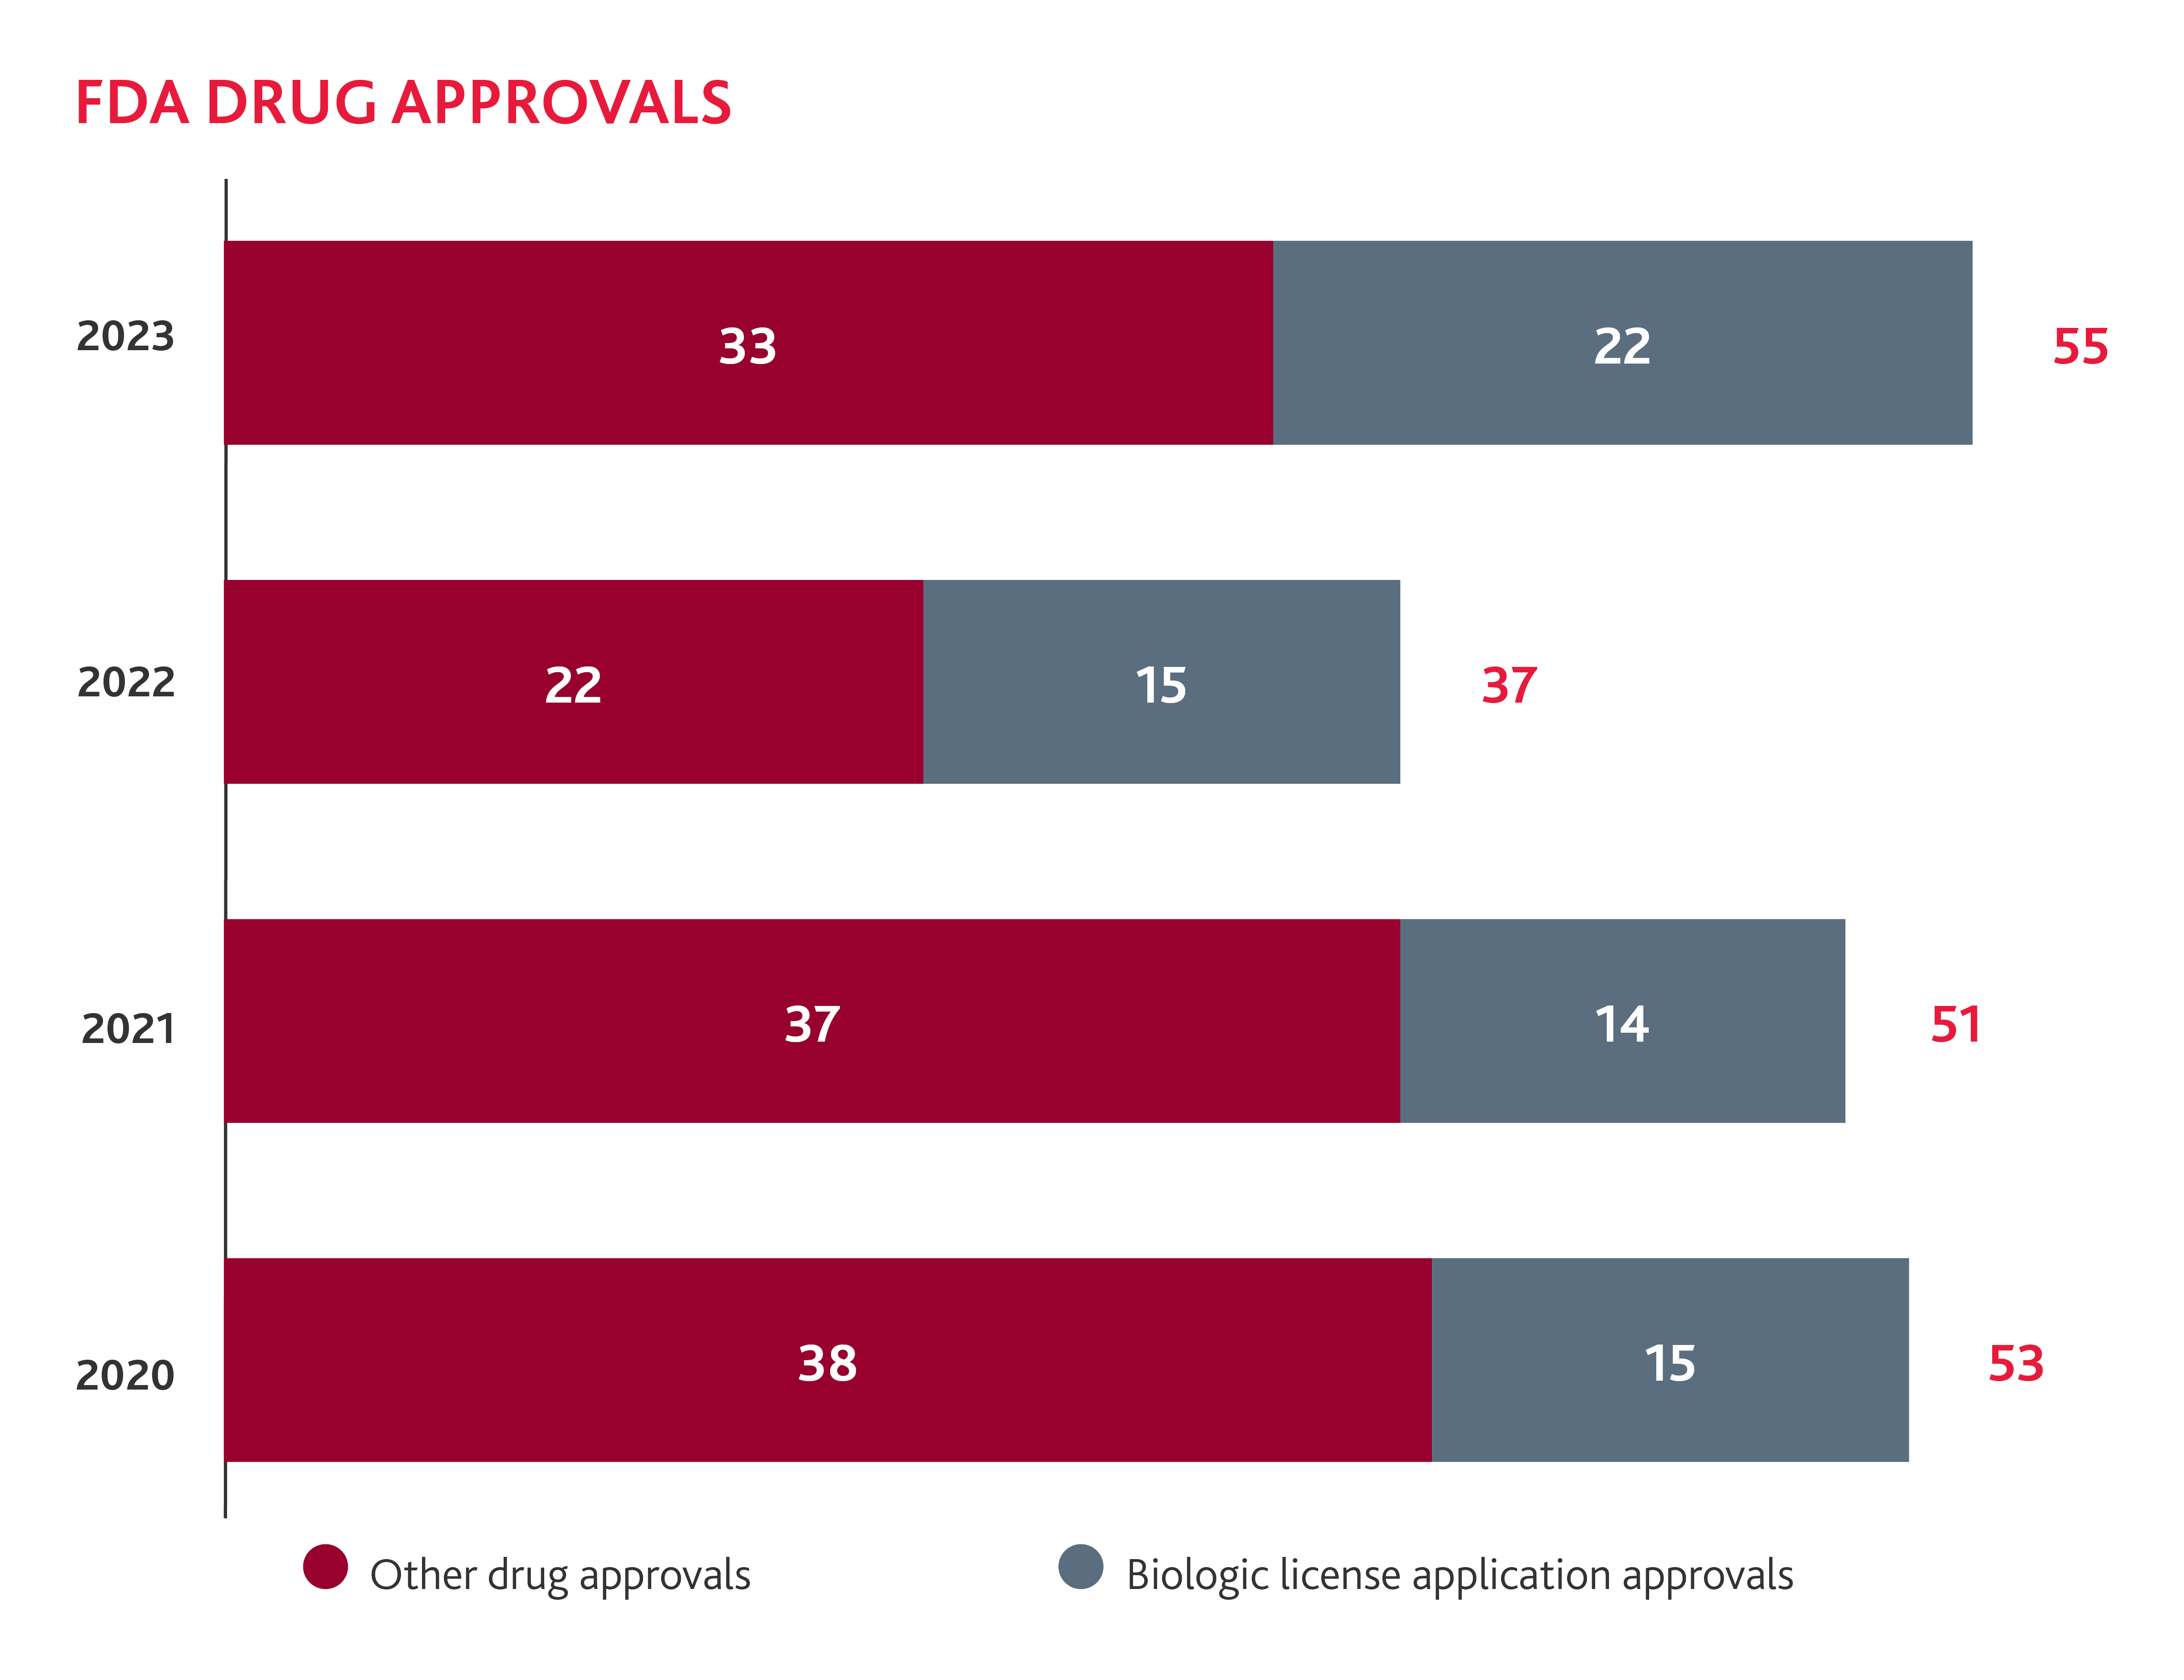 Bar chart showing FDA drug approvals from 2020 to 2023